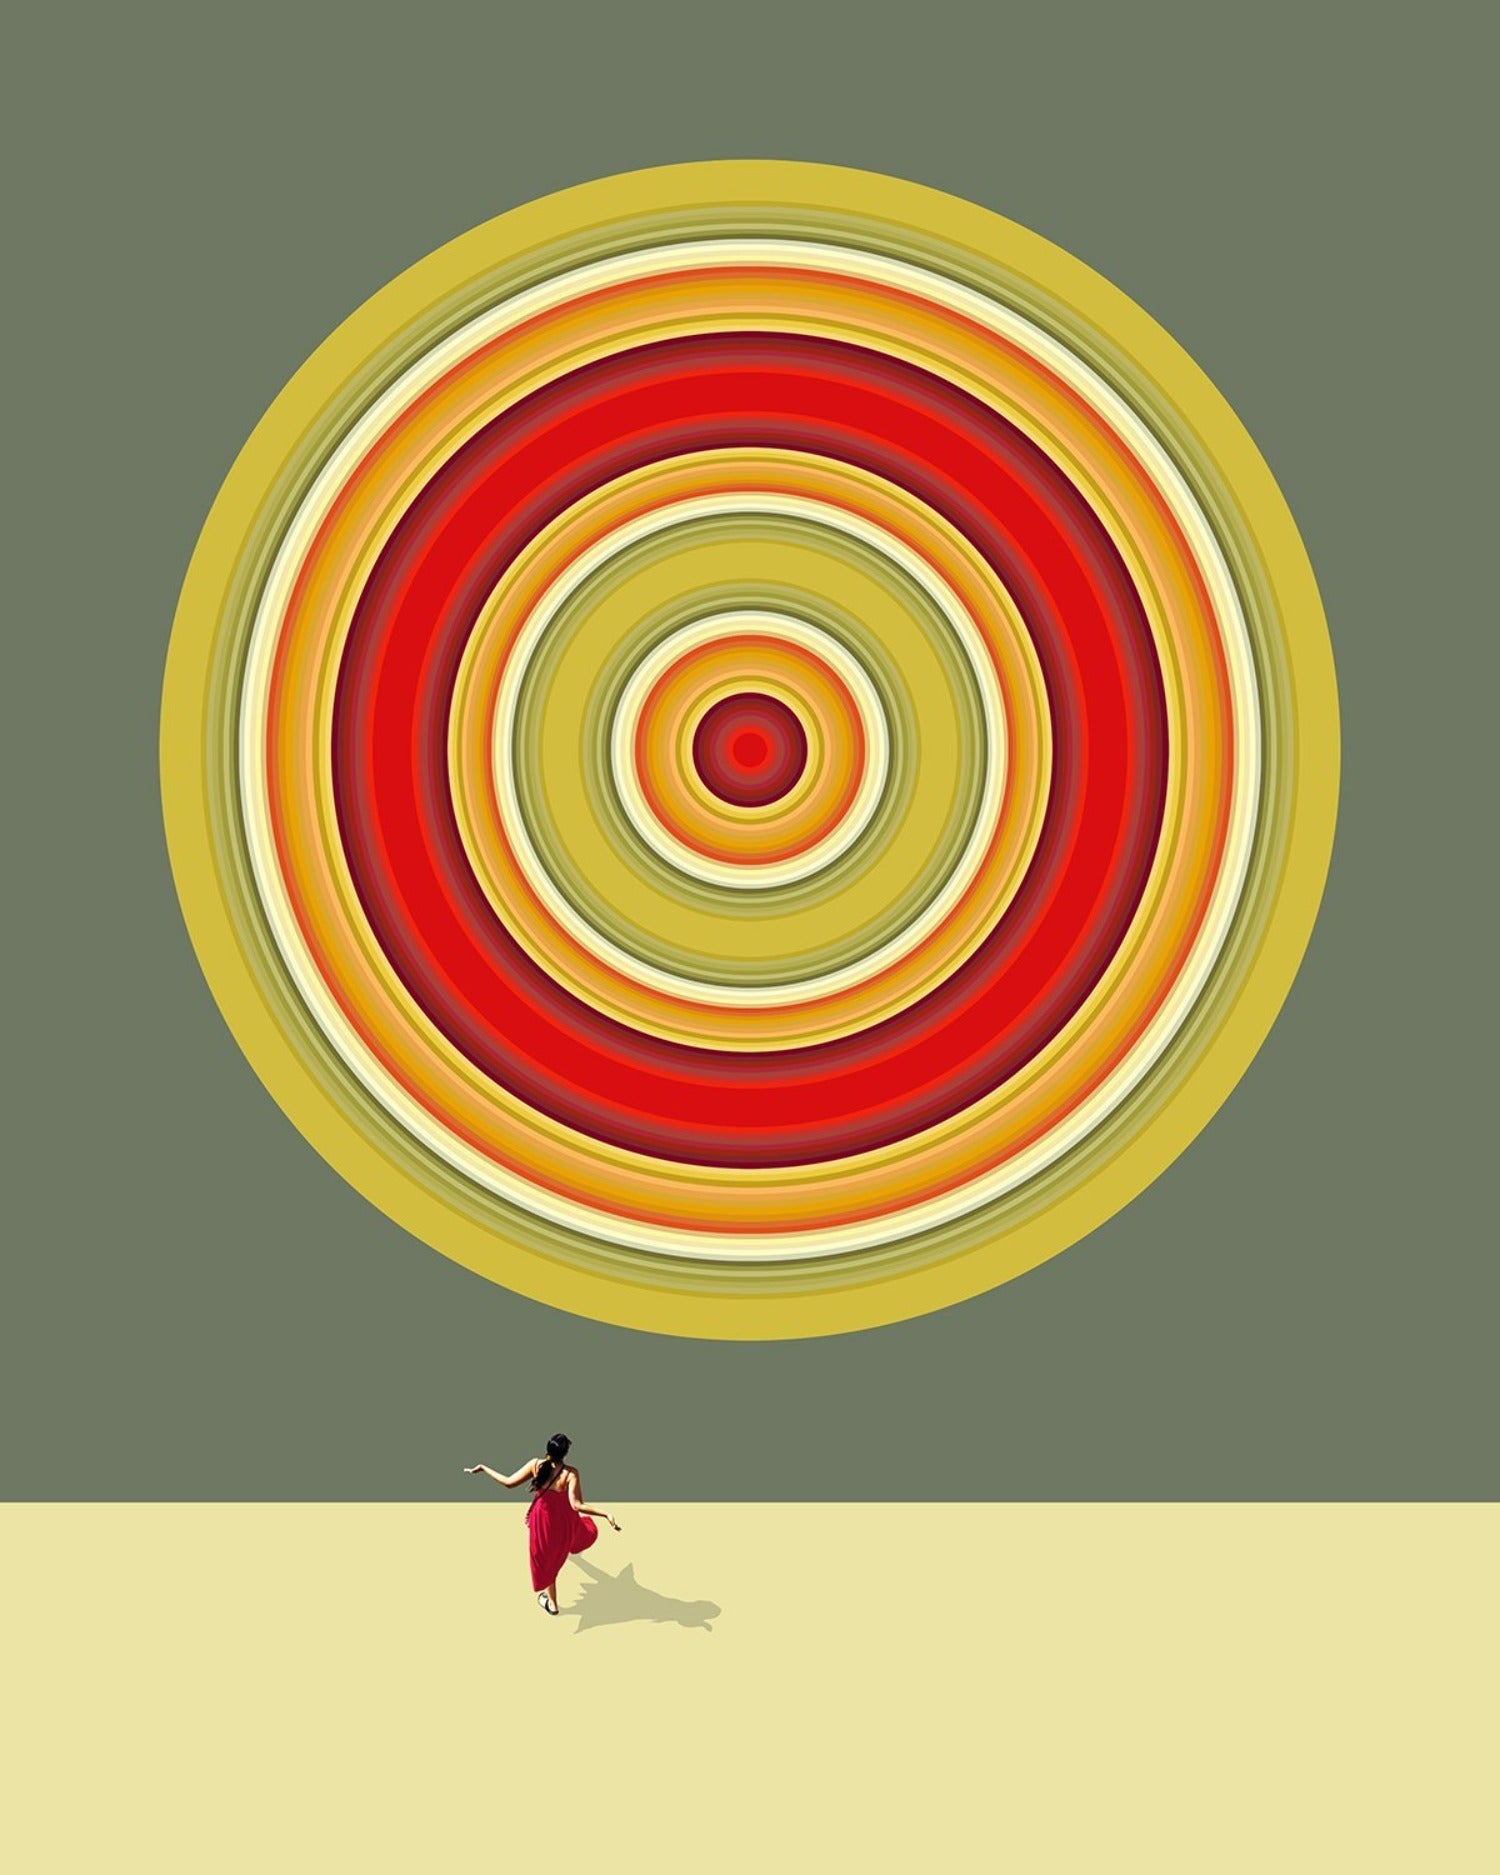 digital painting of woman in red dress dancing in front of red and yellow disk mural by John Ferri